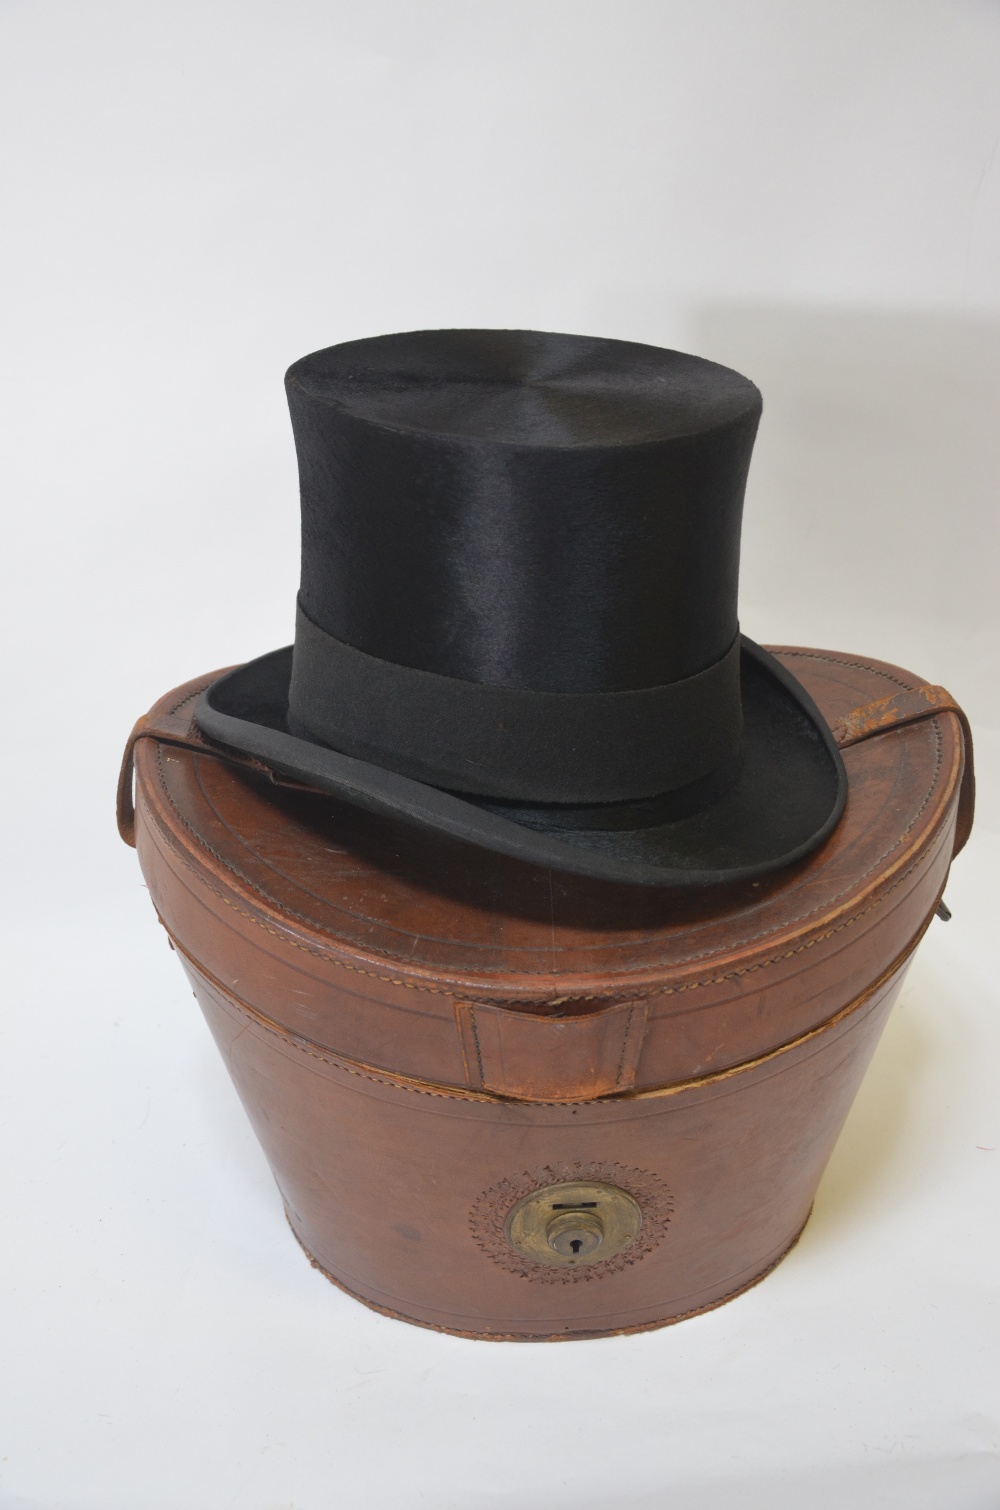 A vintage black silk top hat retailed by Andre & Co. Ltd. Hatters, 163 Piccadilly, W.